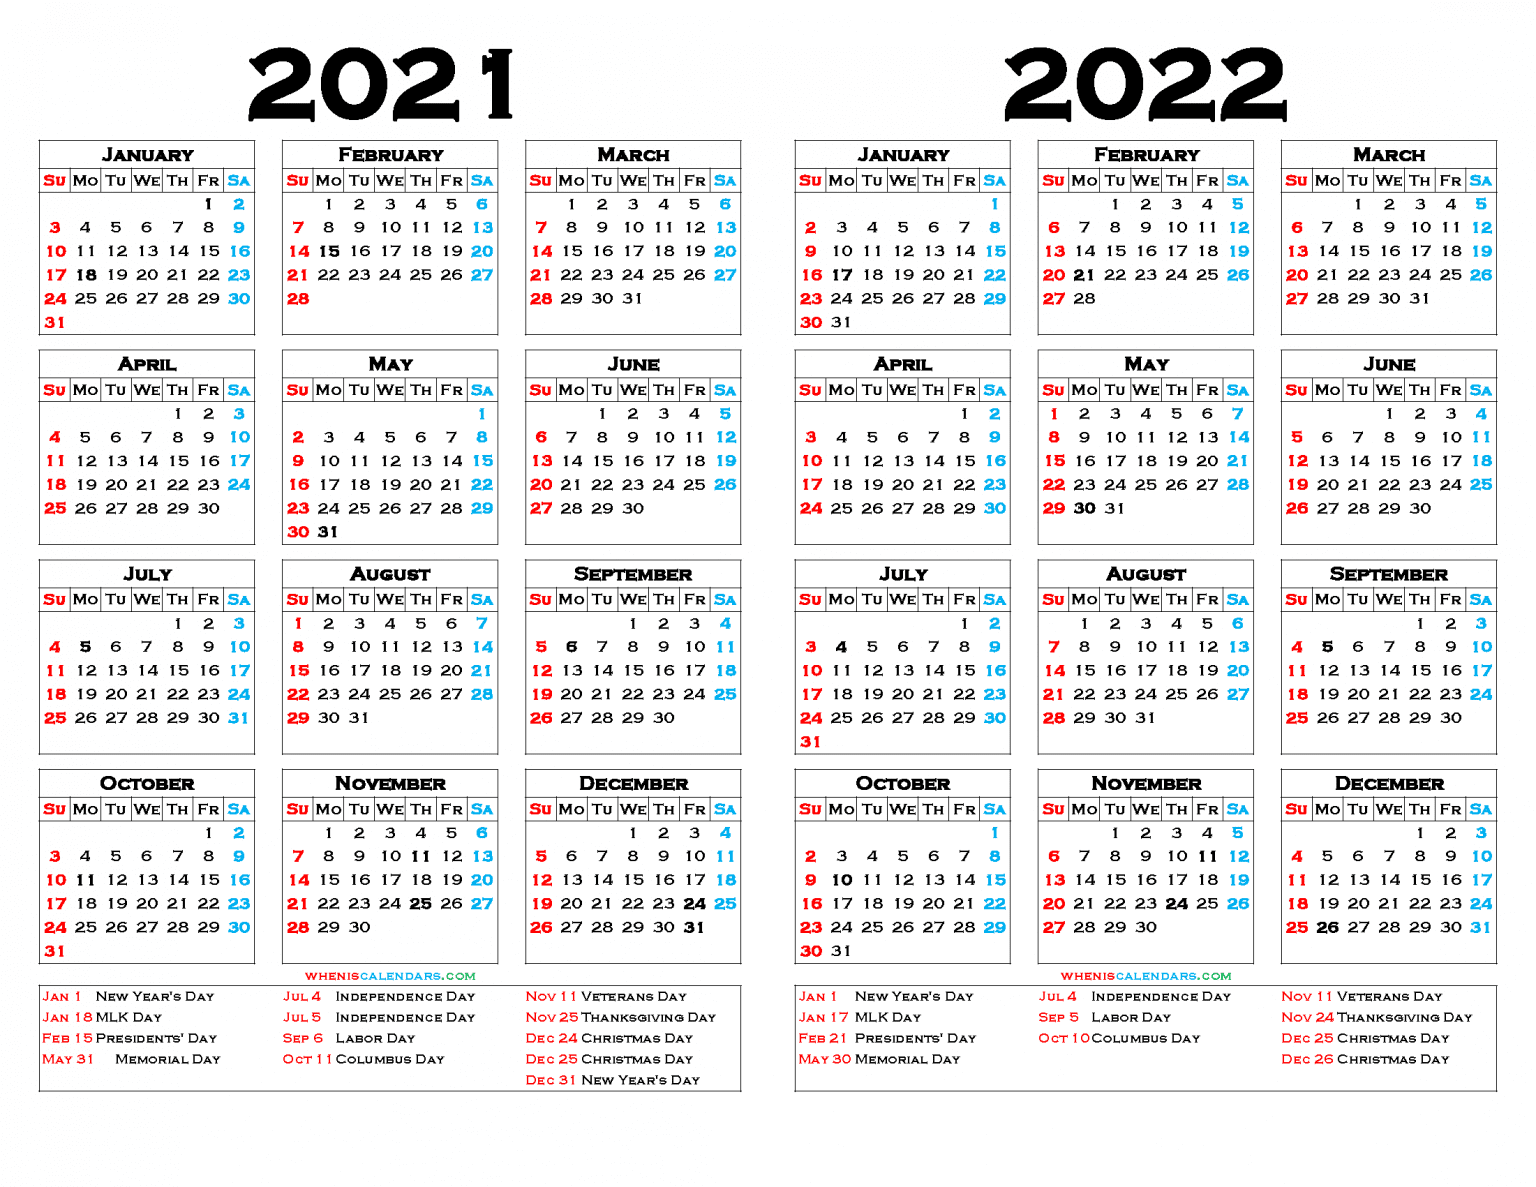 multi-year-calendar-printable-free-letter-templates-create-your-yearlycalendars